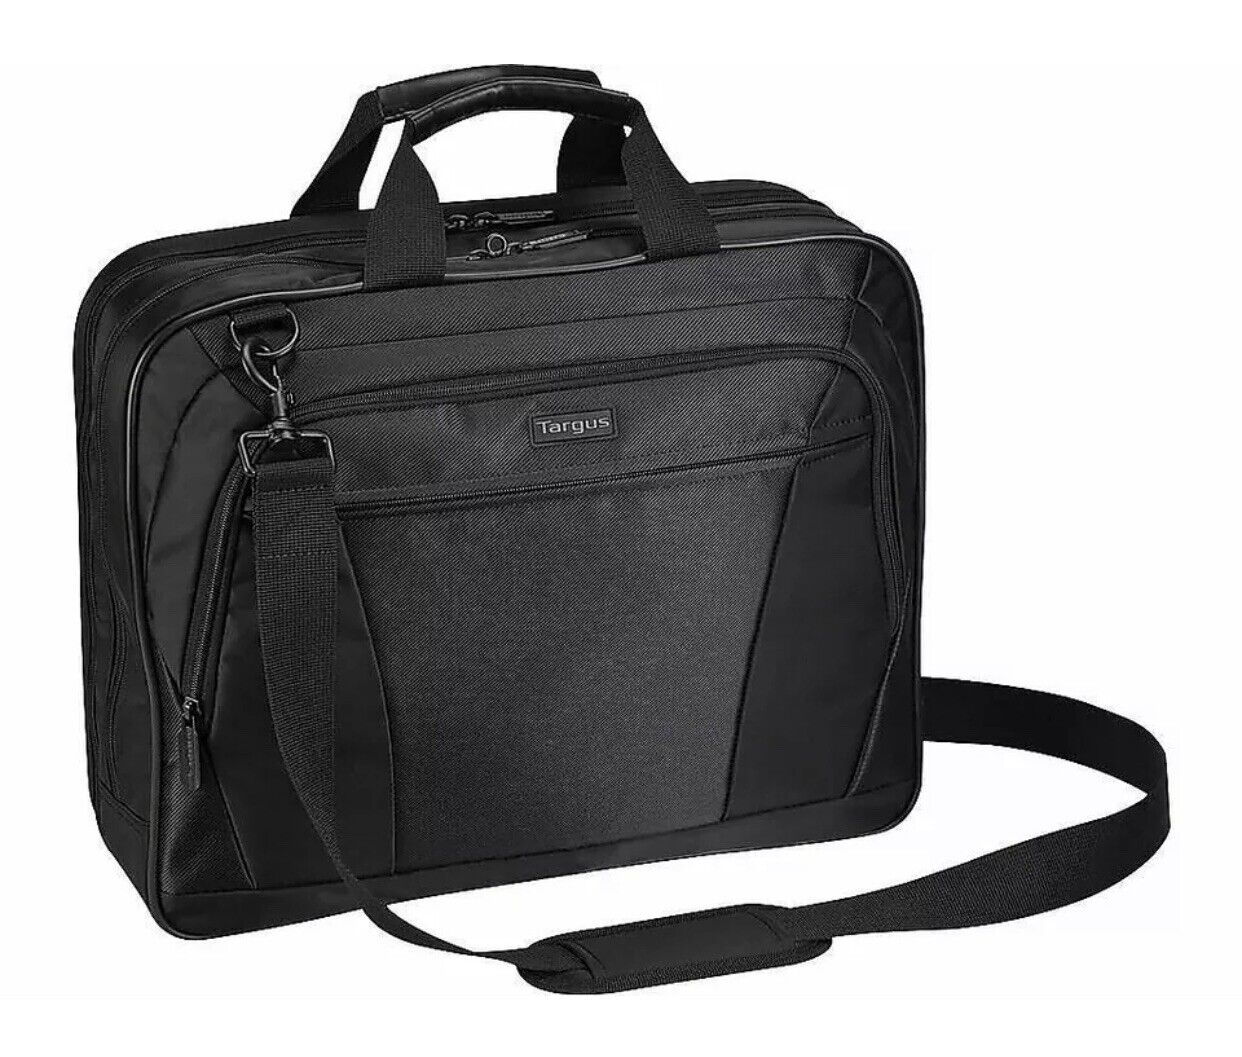 Lot Of 5) Targus CityLite Laptop Briefcase Black (TBT053US-71) FAST US SHIPPING